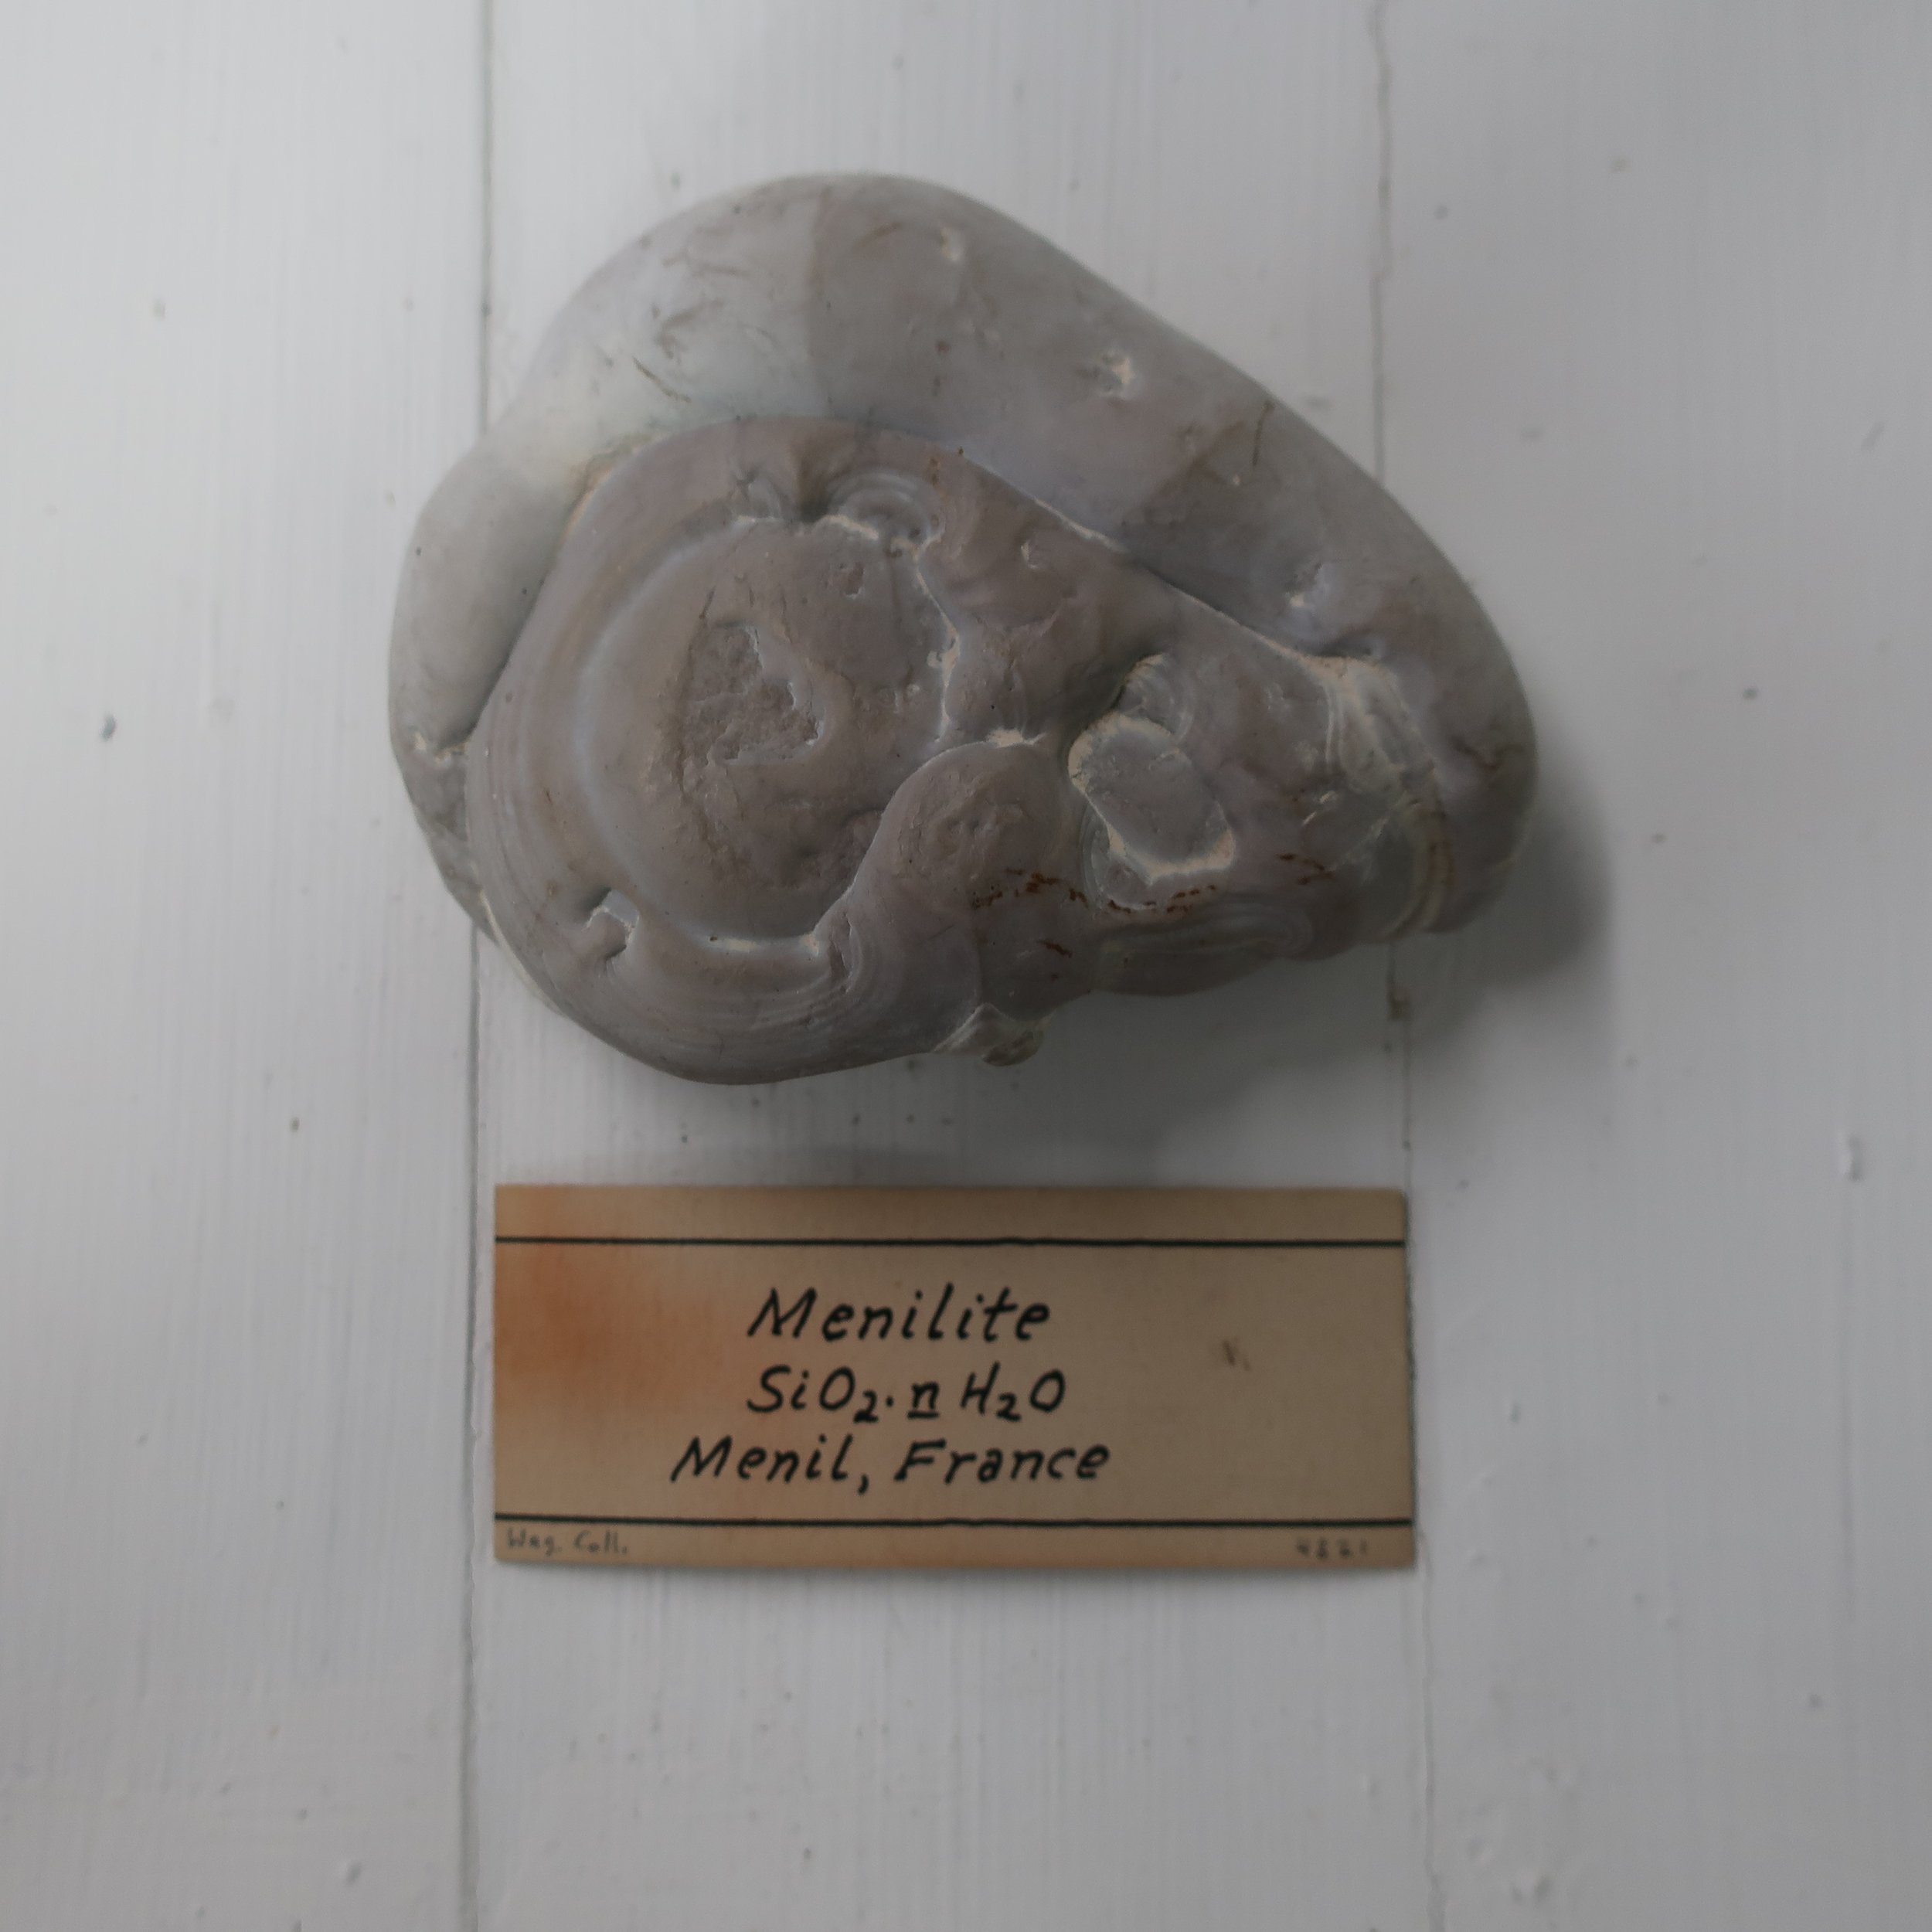   “Menelite  is a variety of semiopal occuring in compact reniform masses of a brown colour, structure slaty, found in beds of adhesive state at Menil-montant near Paris. It contains 85 silica, 1 alumina, and 11 water.” 